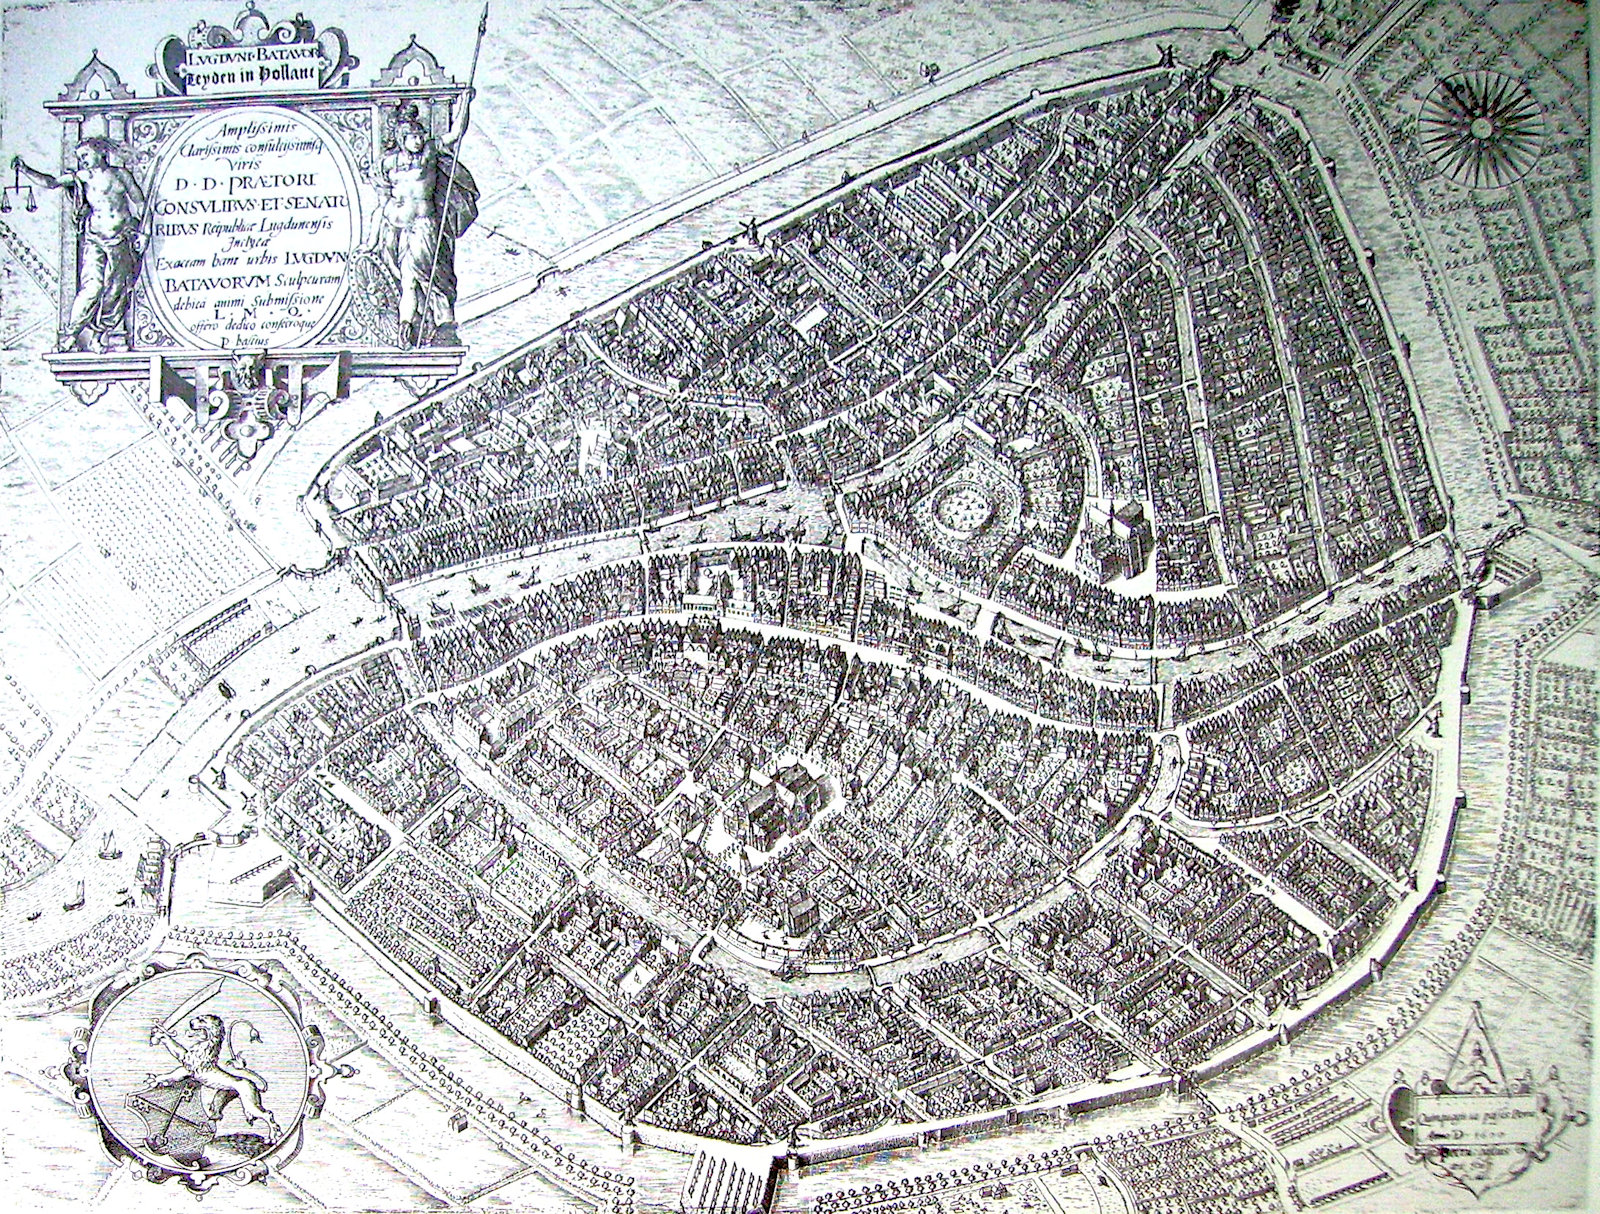 Old map of Leiden